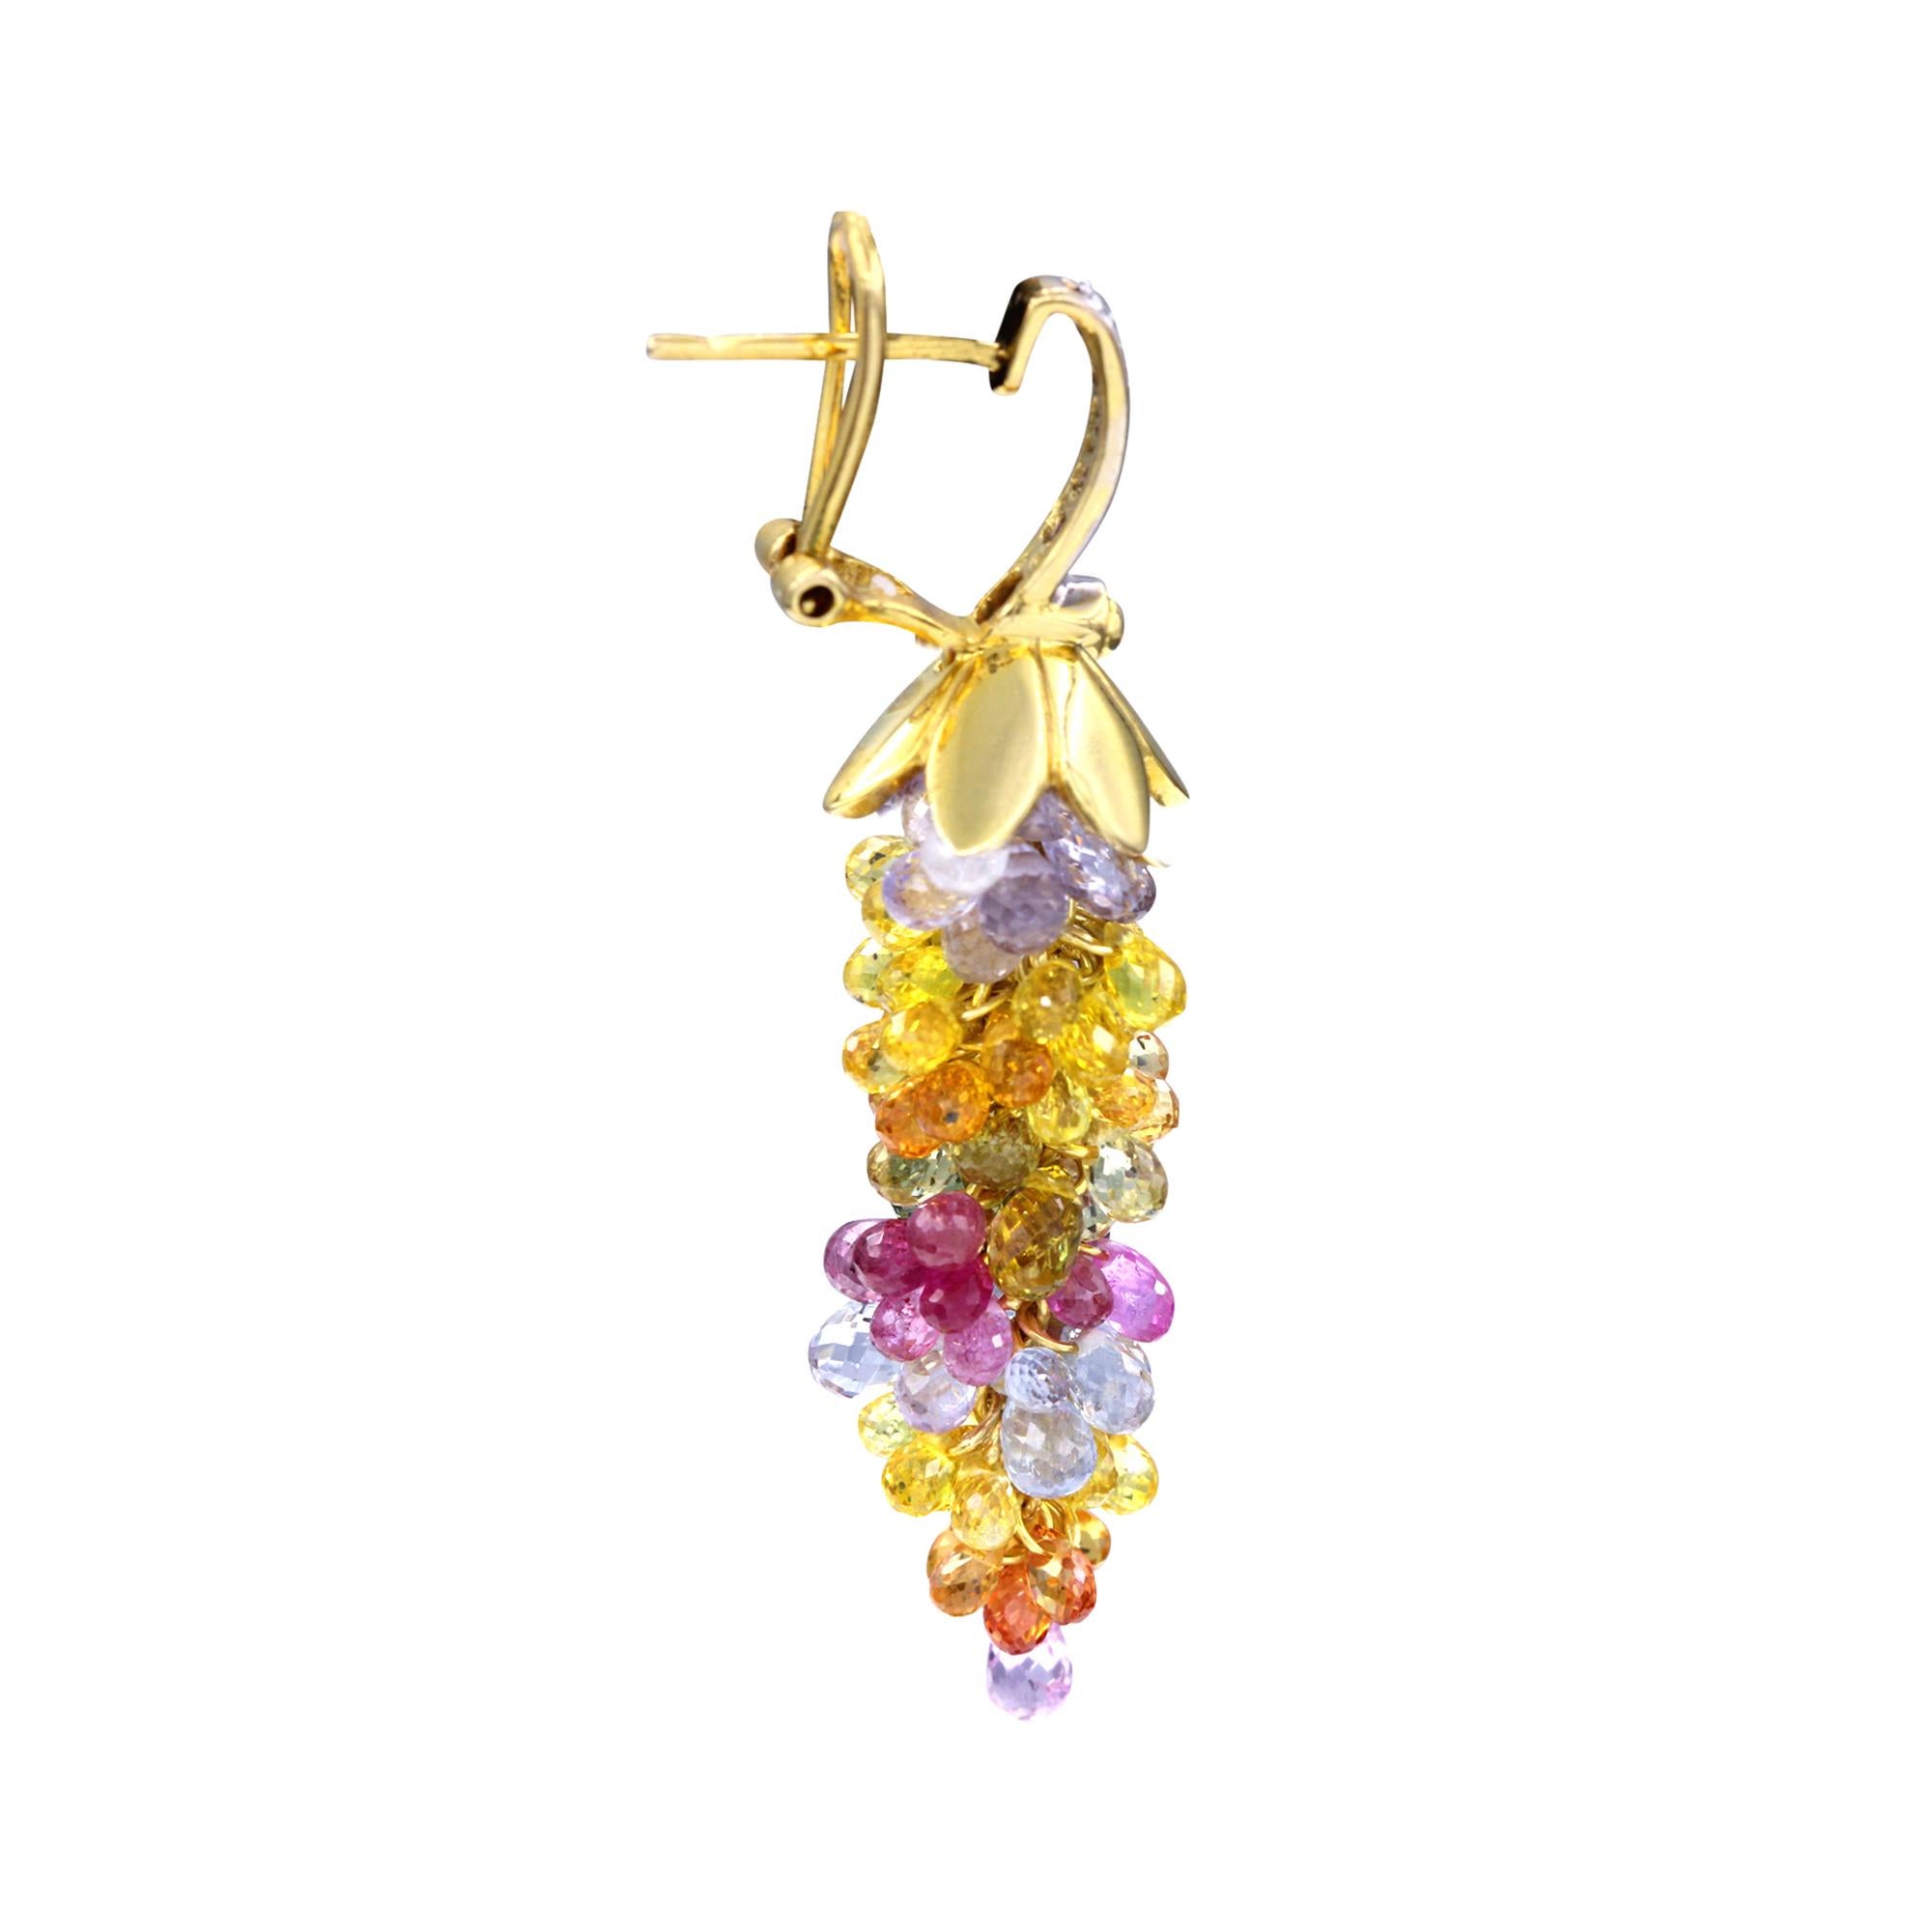 A beautiful pair of multi-colored chandelier earrings with white, yellow, blue, pink, and orange sapphires held together by a golden flower cap, accented with diamonds on the top in 18K White Gold. Mounted in 18K Yellow Gold. 